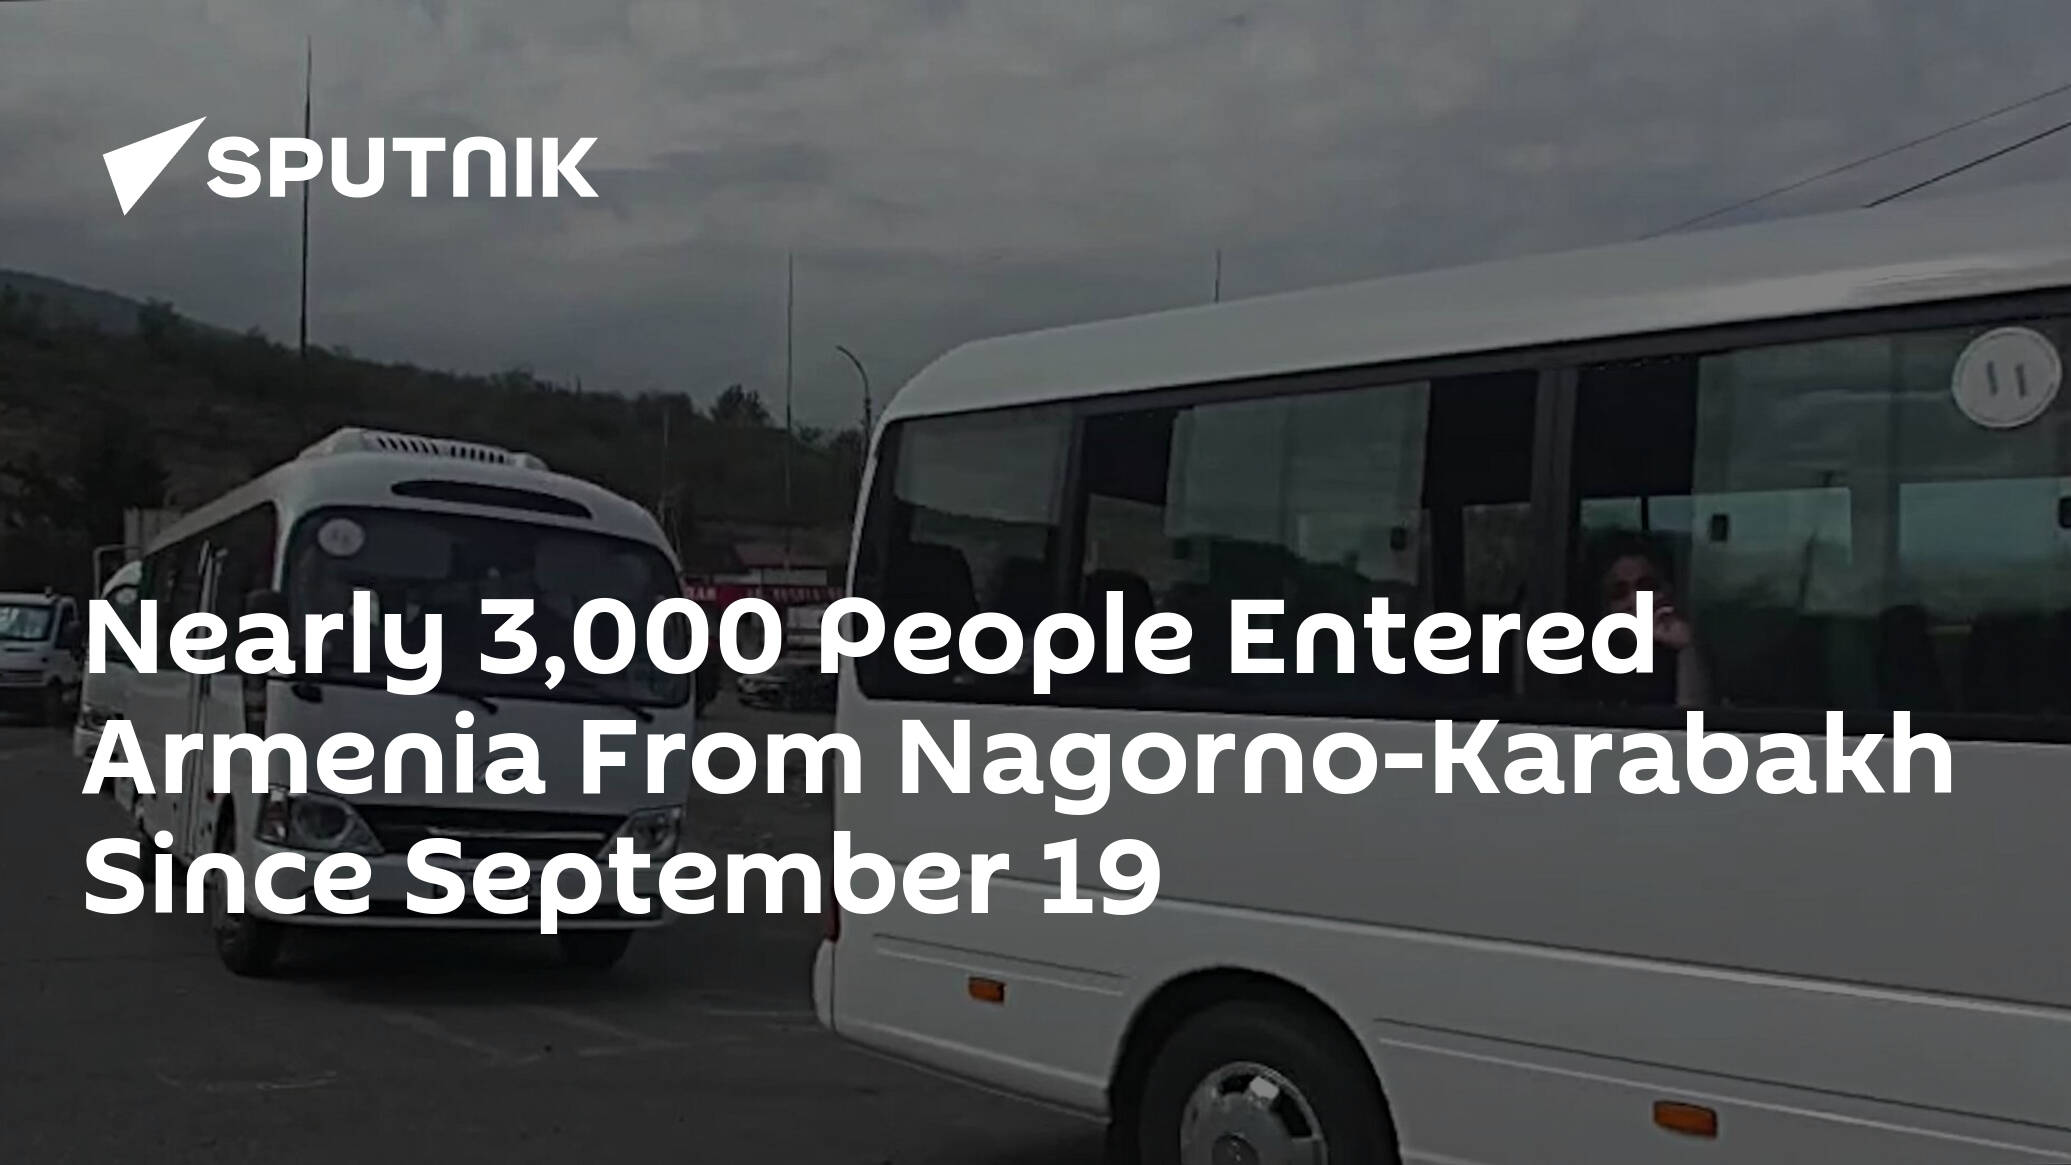 Nearly 3,000 People Entered Armenia From Nagorno-Karabakh Since September 19